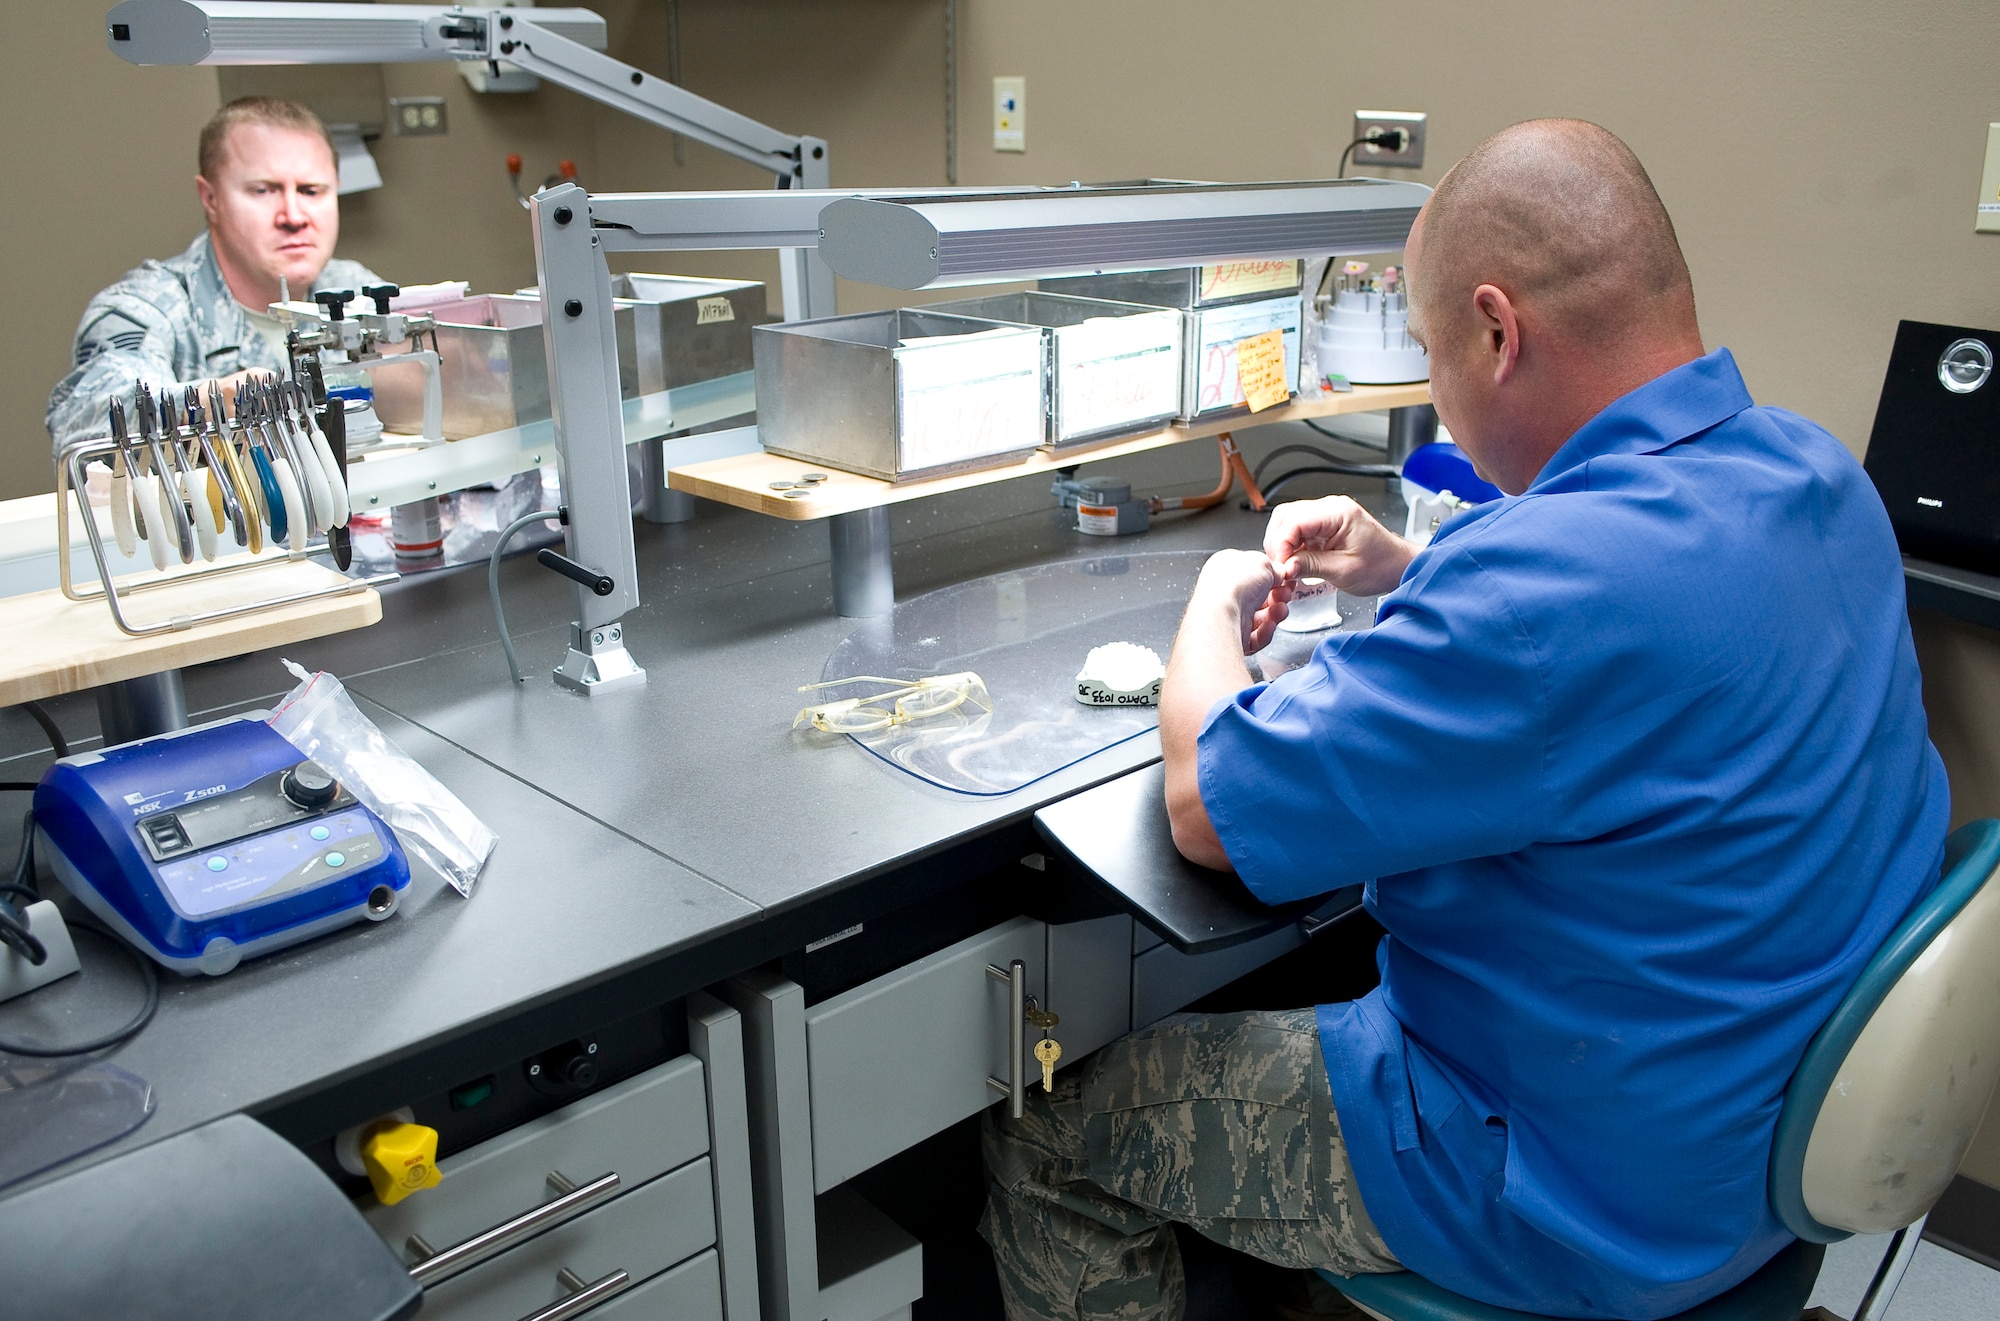 Master Sgt. Denny Shaffer, 2nd Dental Squadron laboratory flight chief, and Tech. Sgt. William Fitzpatrick, 2 DS laboratory technician, shape molds of wax teeth in the new dental lab on Barksdale Air Force Base, La., May 22. The new facility has eight fully-equipped workstations and two adjacent rooms for additional jobs that require specialized equipment. (U.S. Air Force photo/Staff Sgt. Chad Warren)(RELEASED)